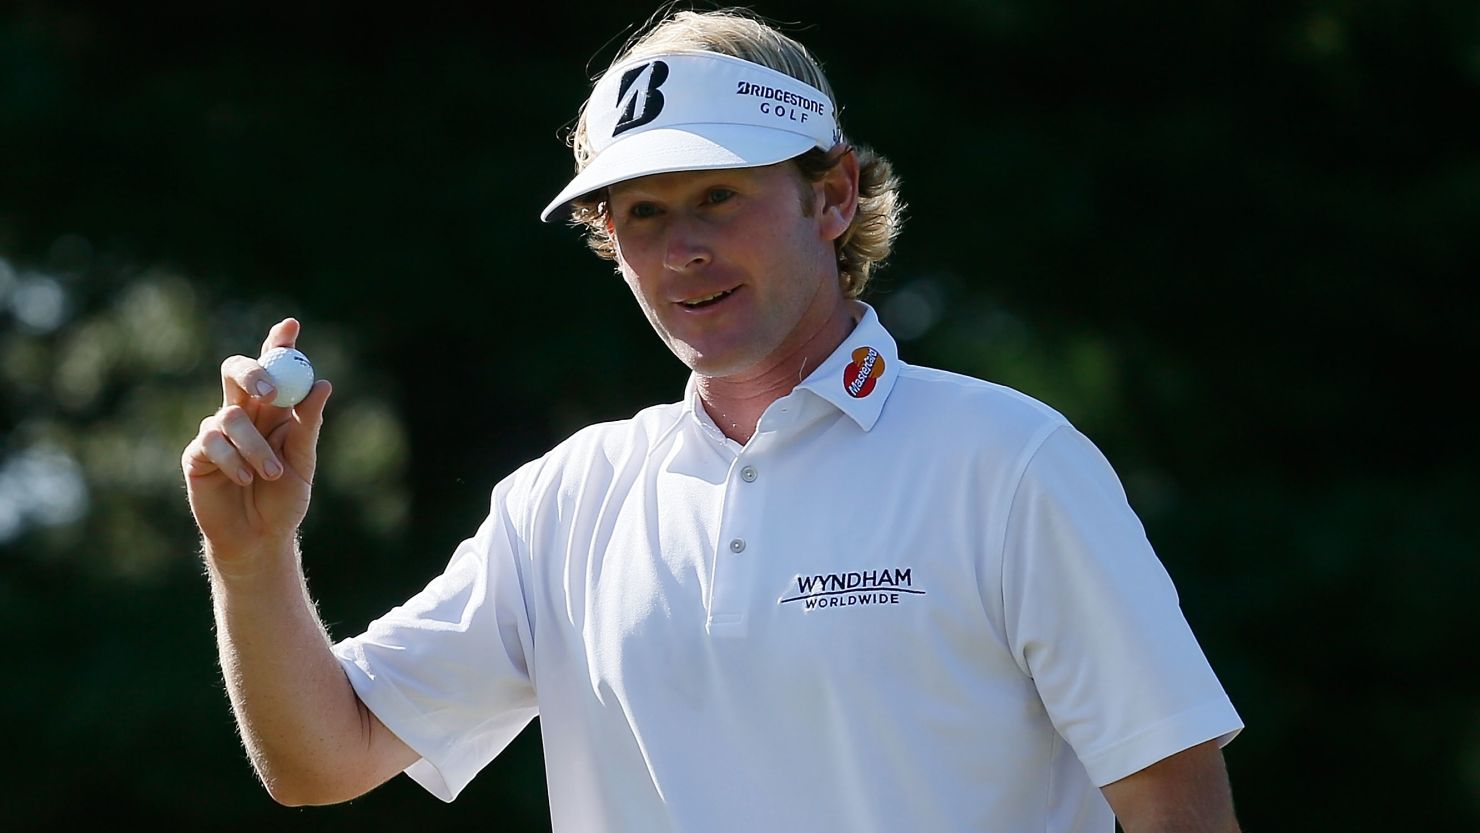 Ryder Cup new boy Brandt Snedeker reacts after holding a birdie putt at the recent Barclays tournament.  